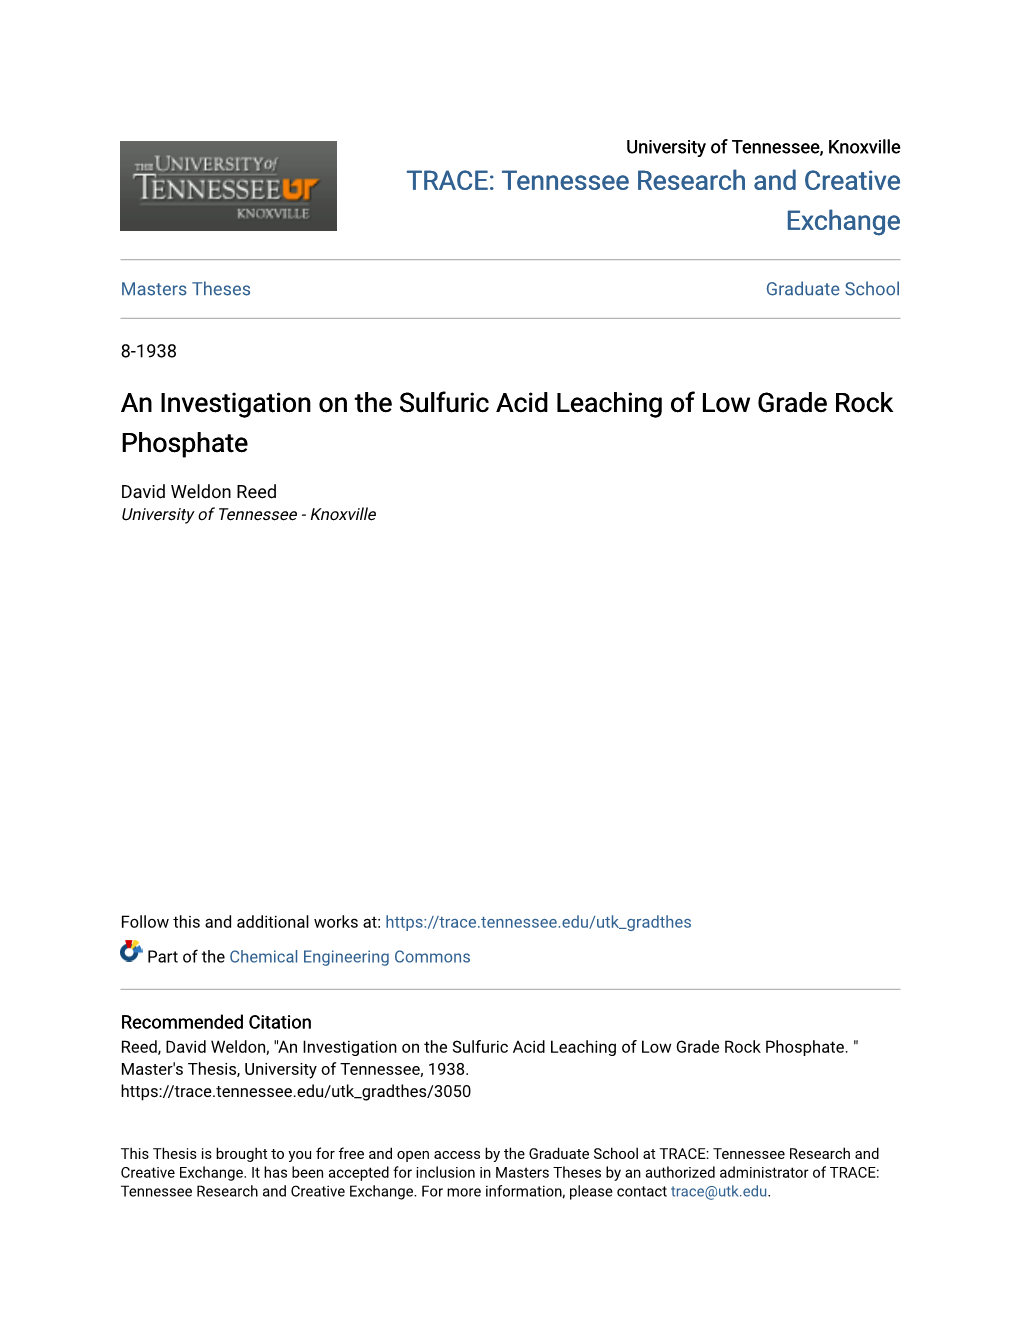 An Investigation on the Sulfuric Acid Leaching of Low Grade Rock Phosphate